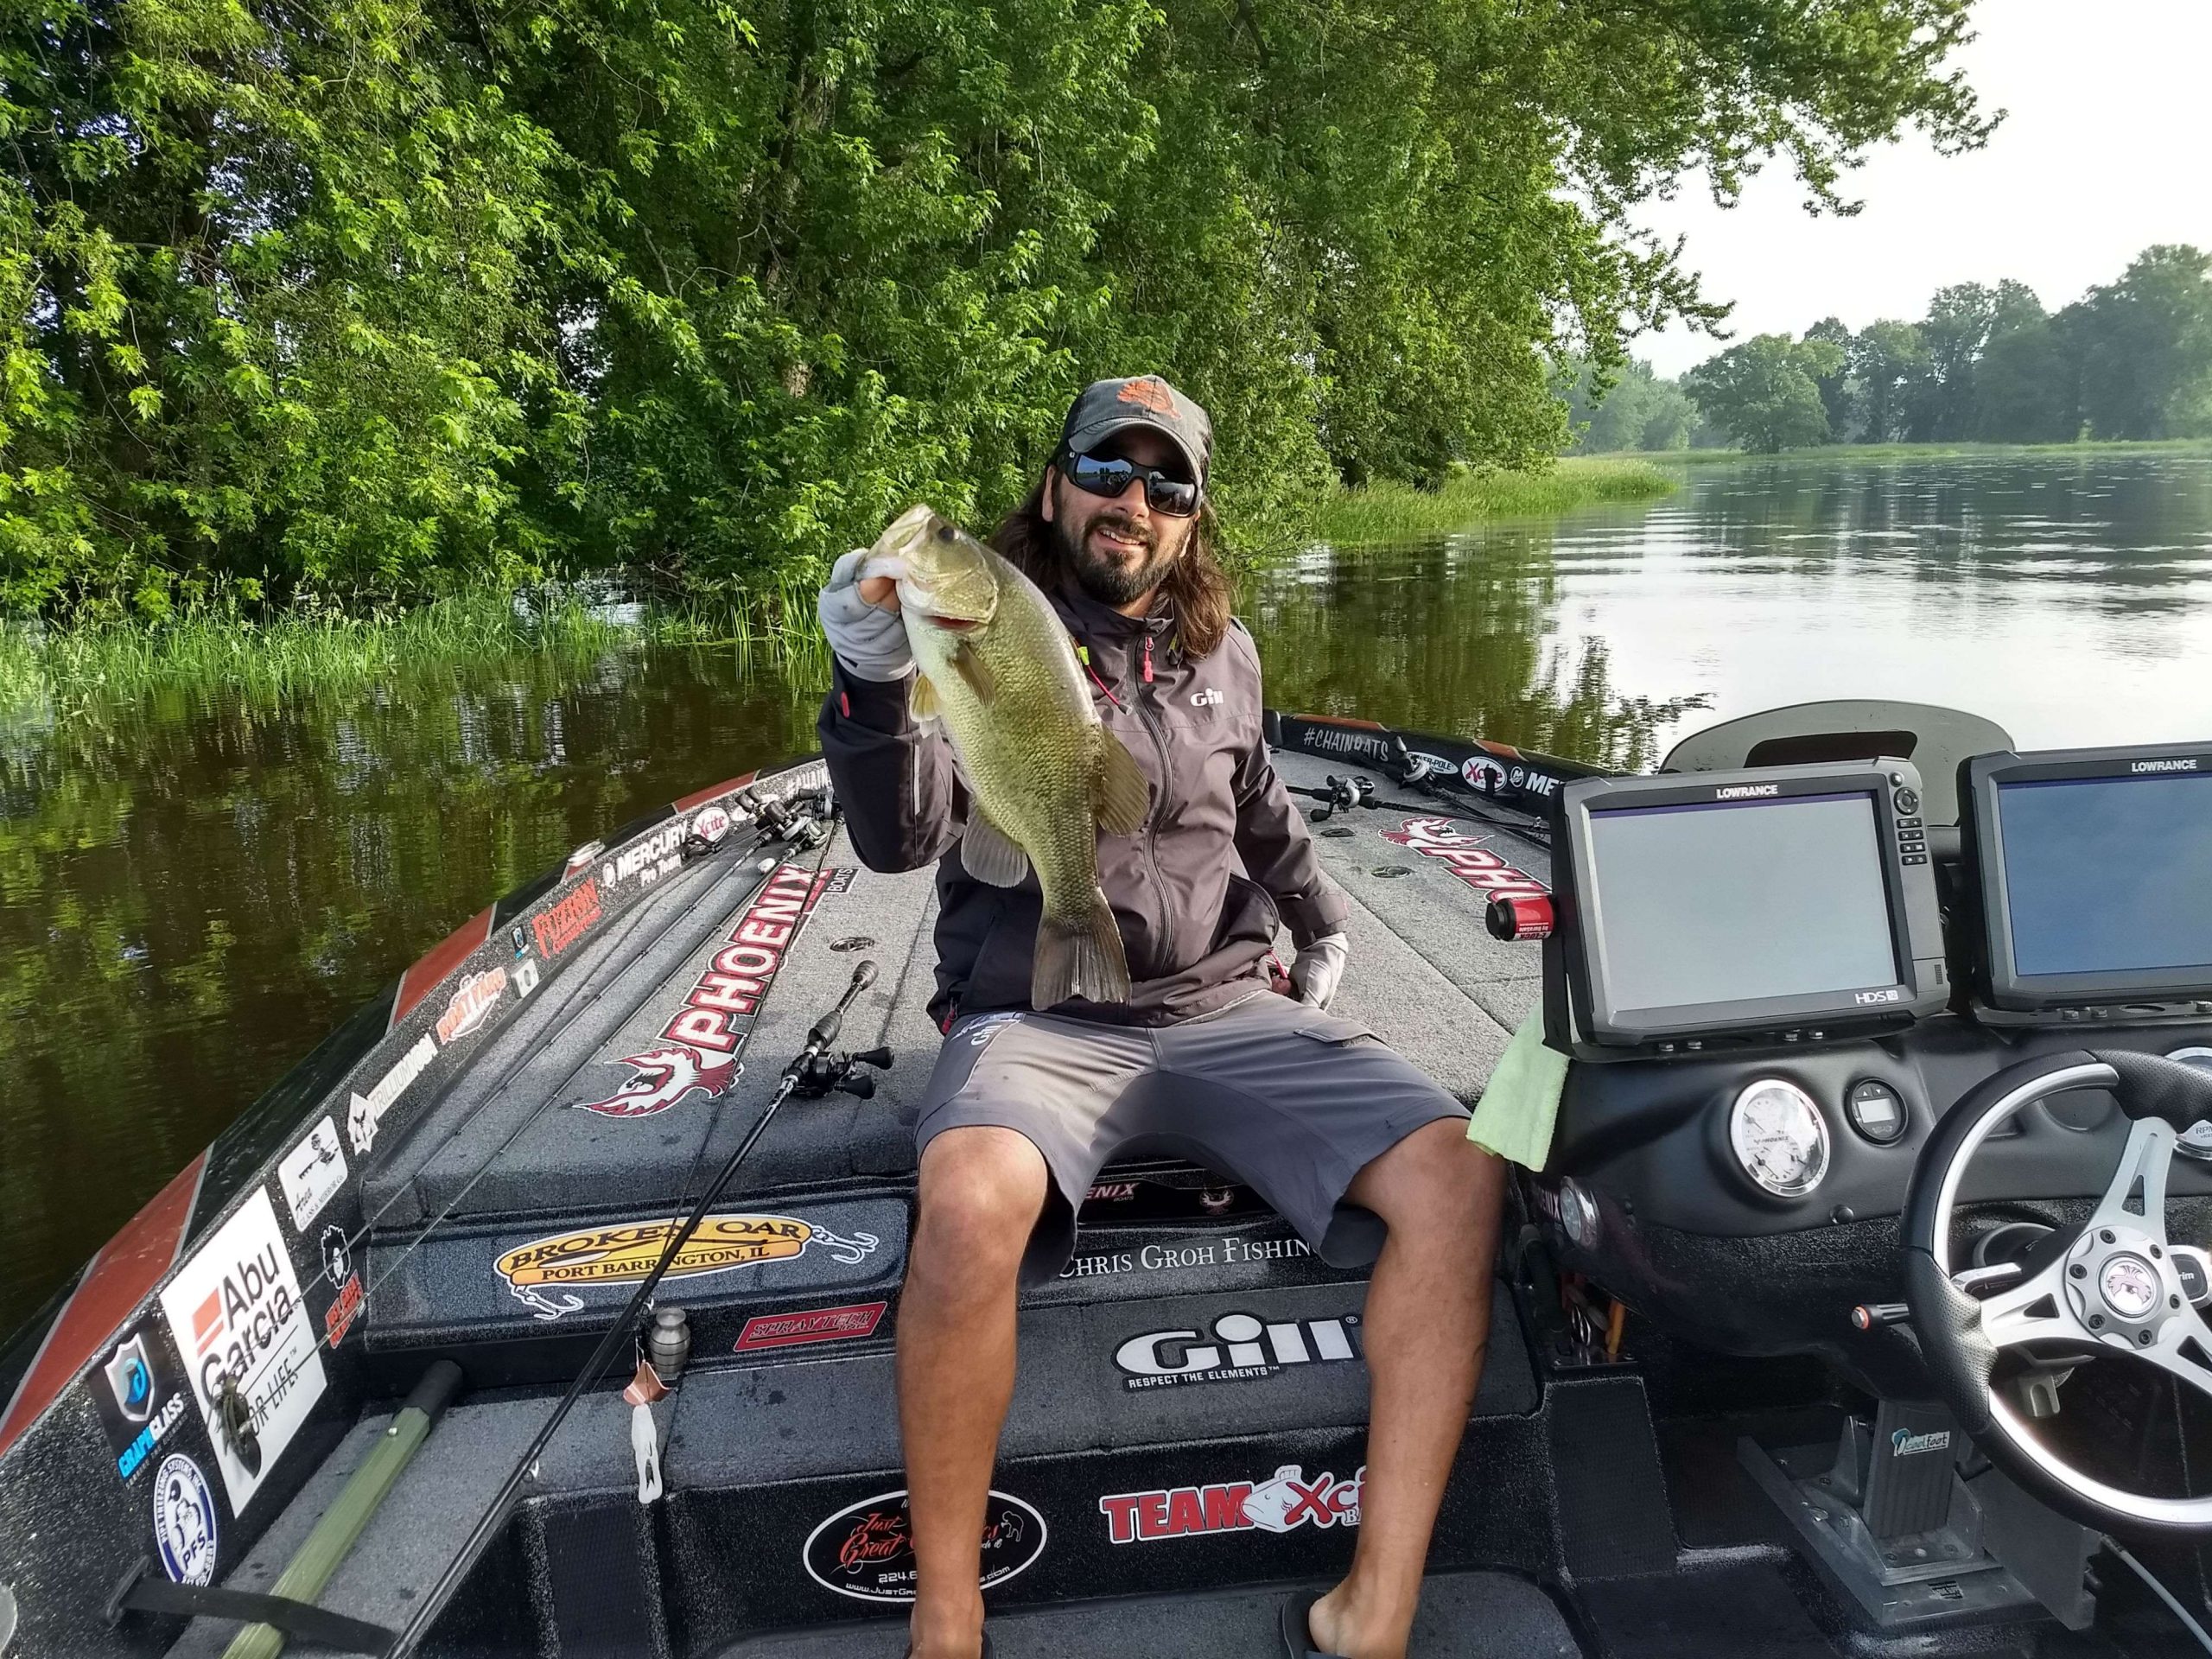 Chris Groh got his day off to a good start with a 2+ pounder largemouth.  